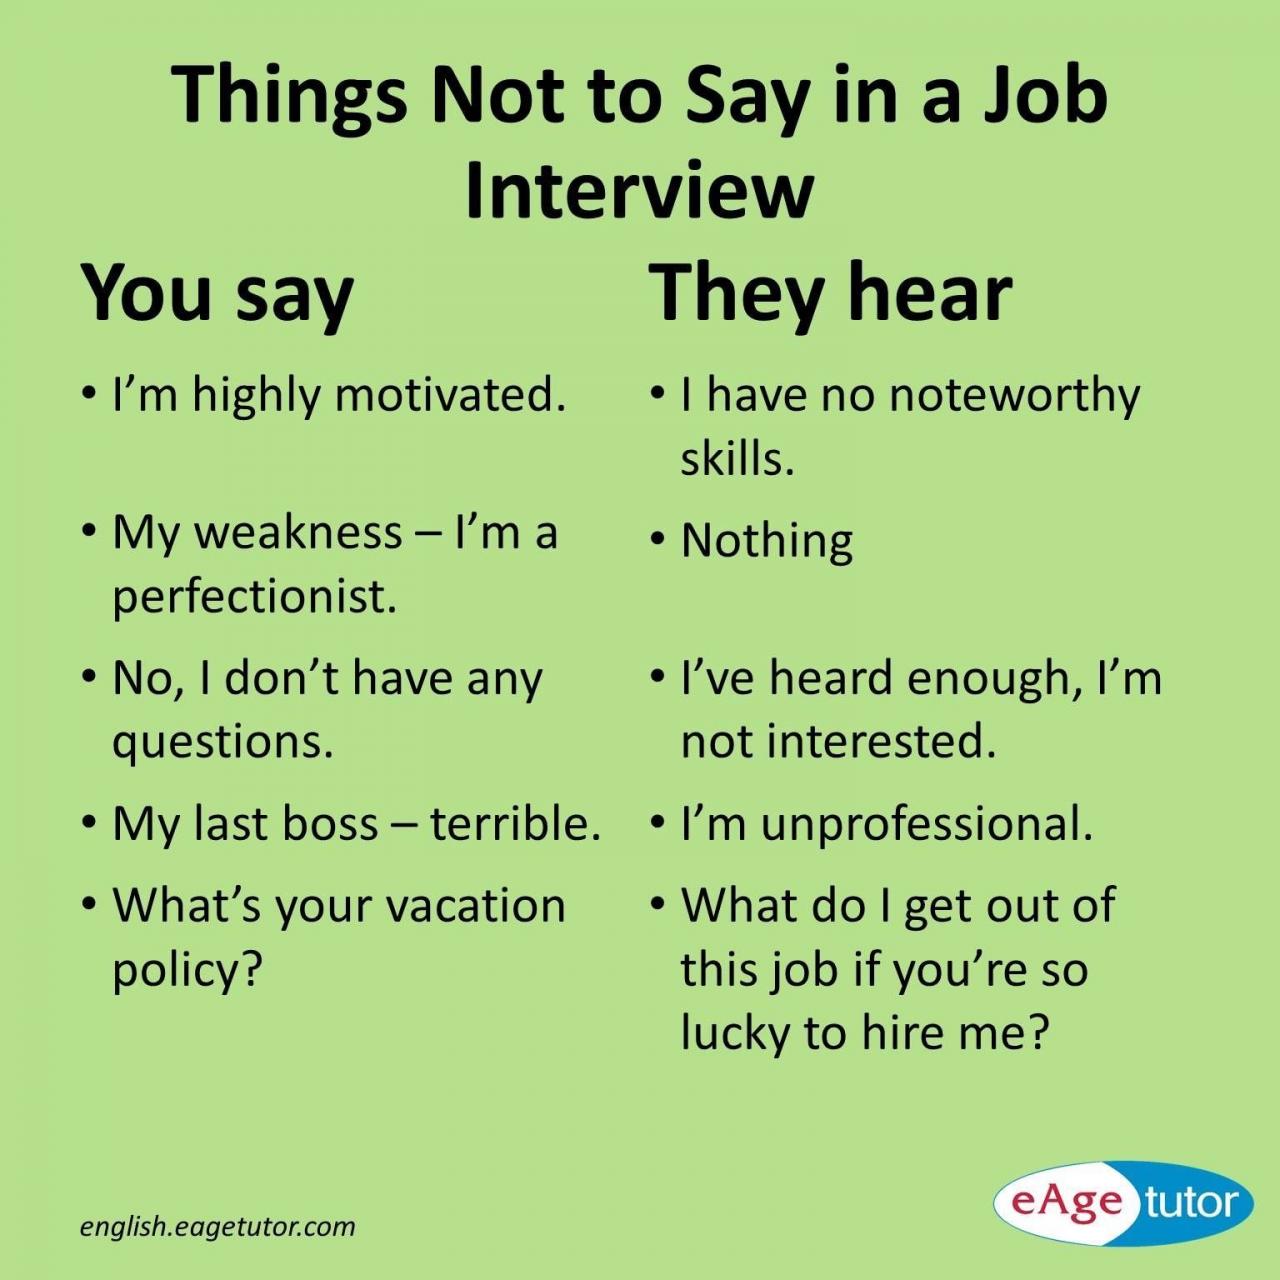 3 good weaknesses to say in an interview